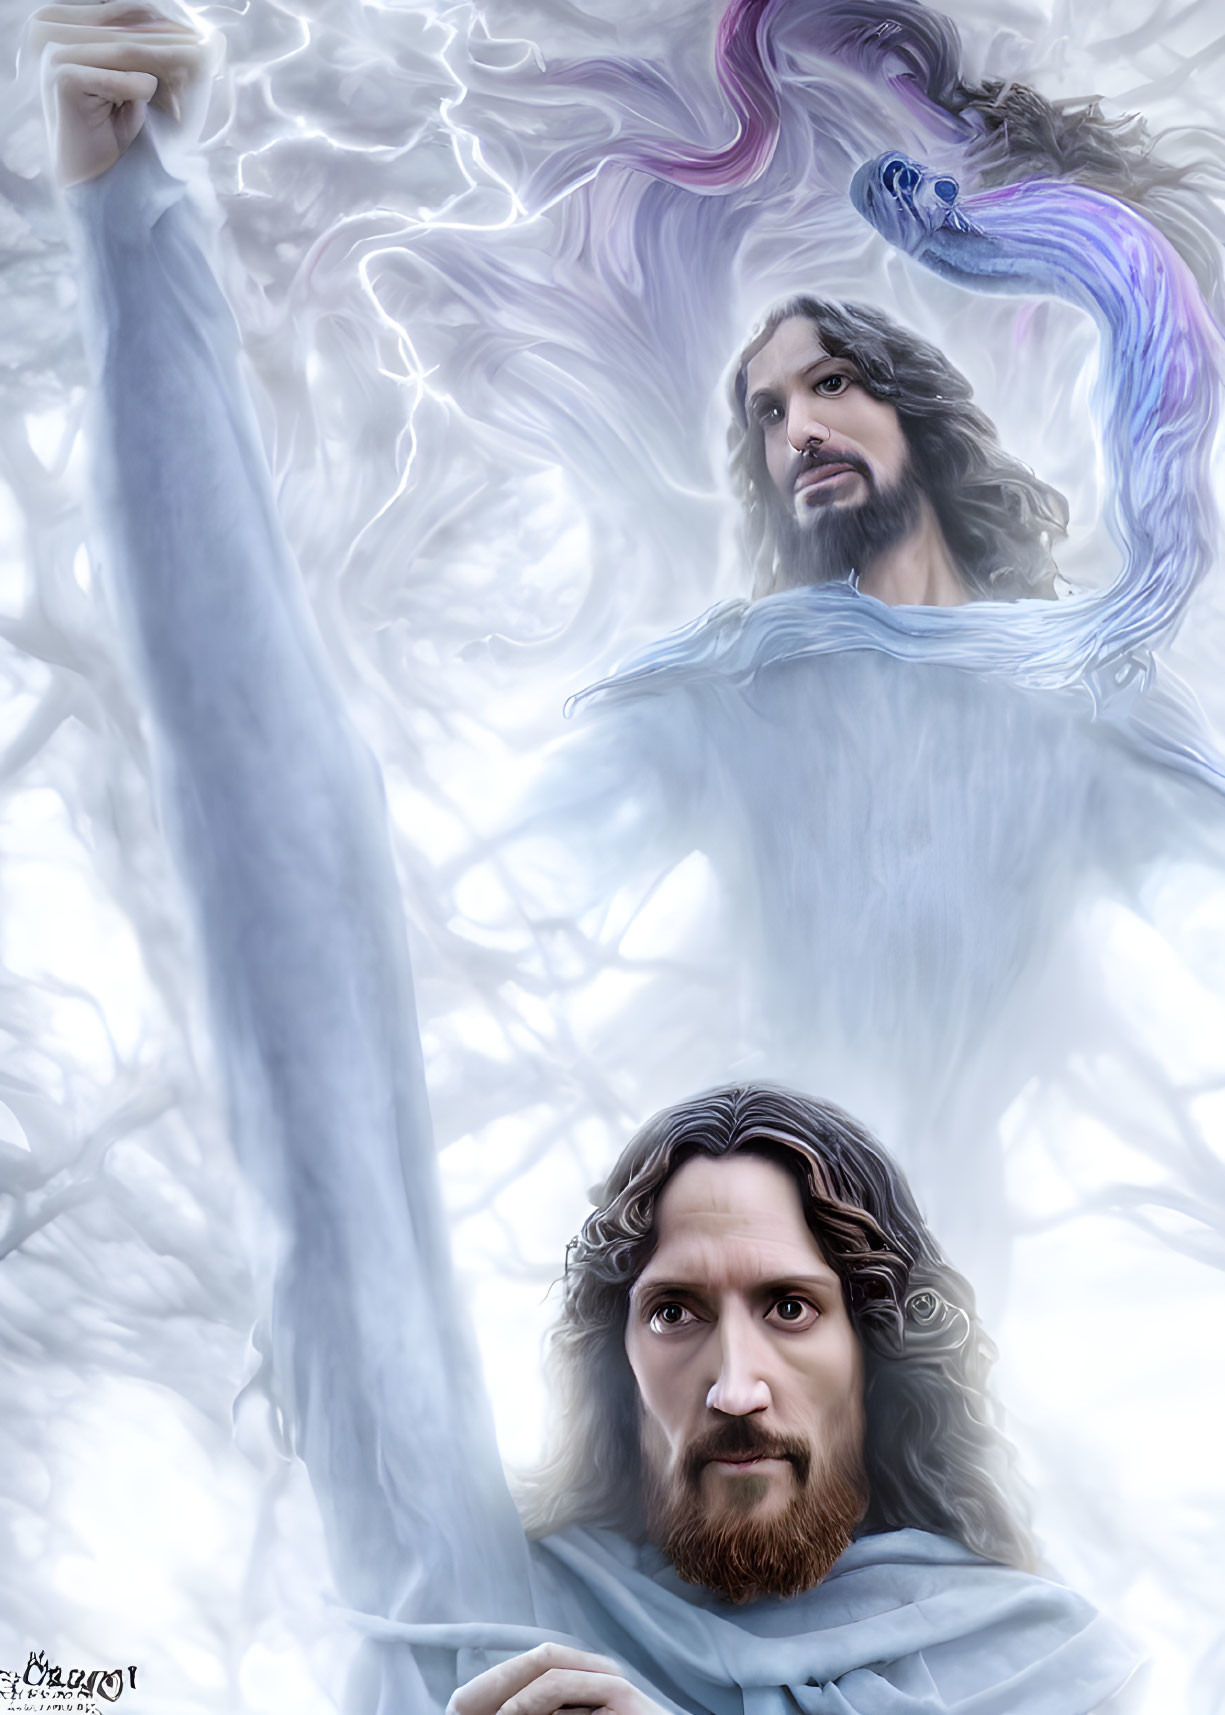 Mystical digital artwork of two ethereal male figures in mist with serpent